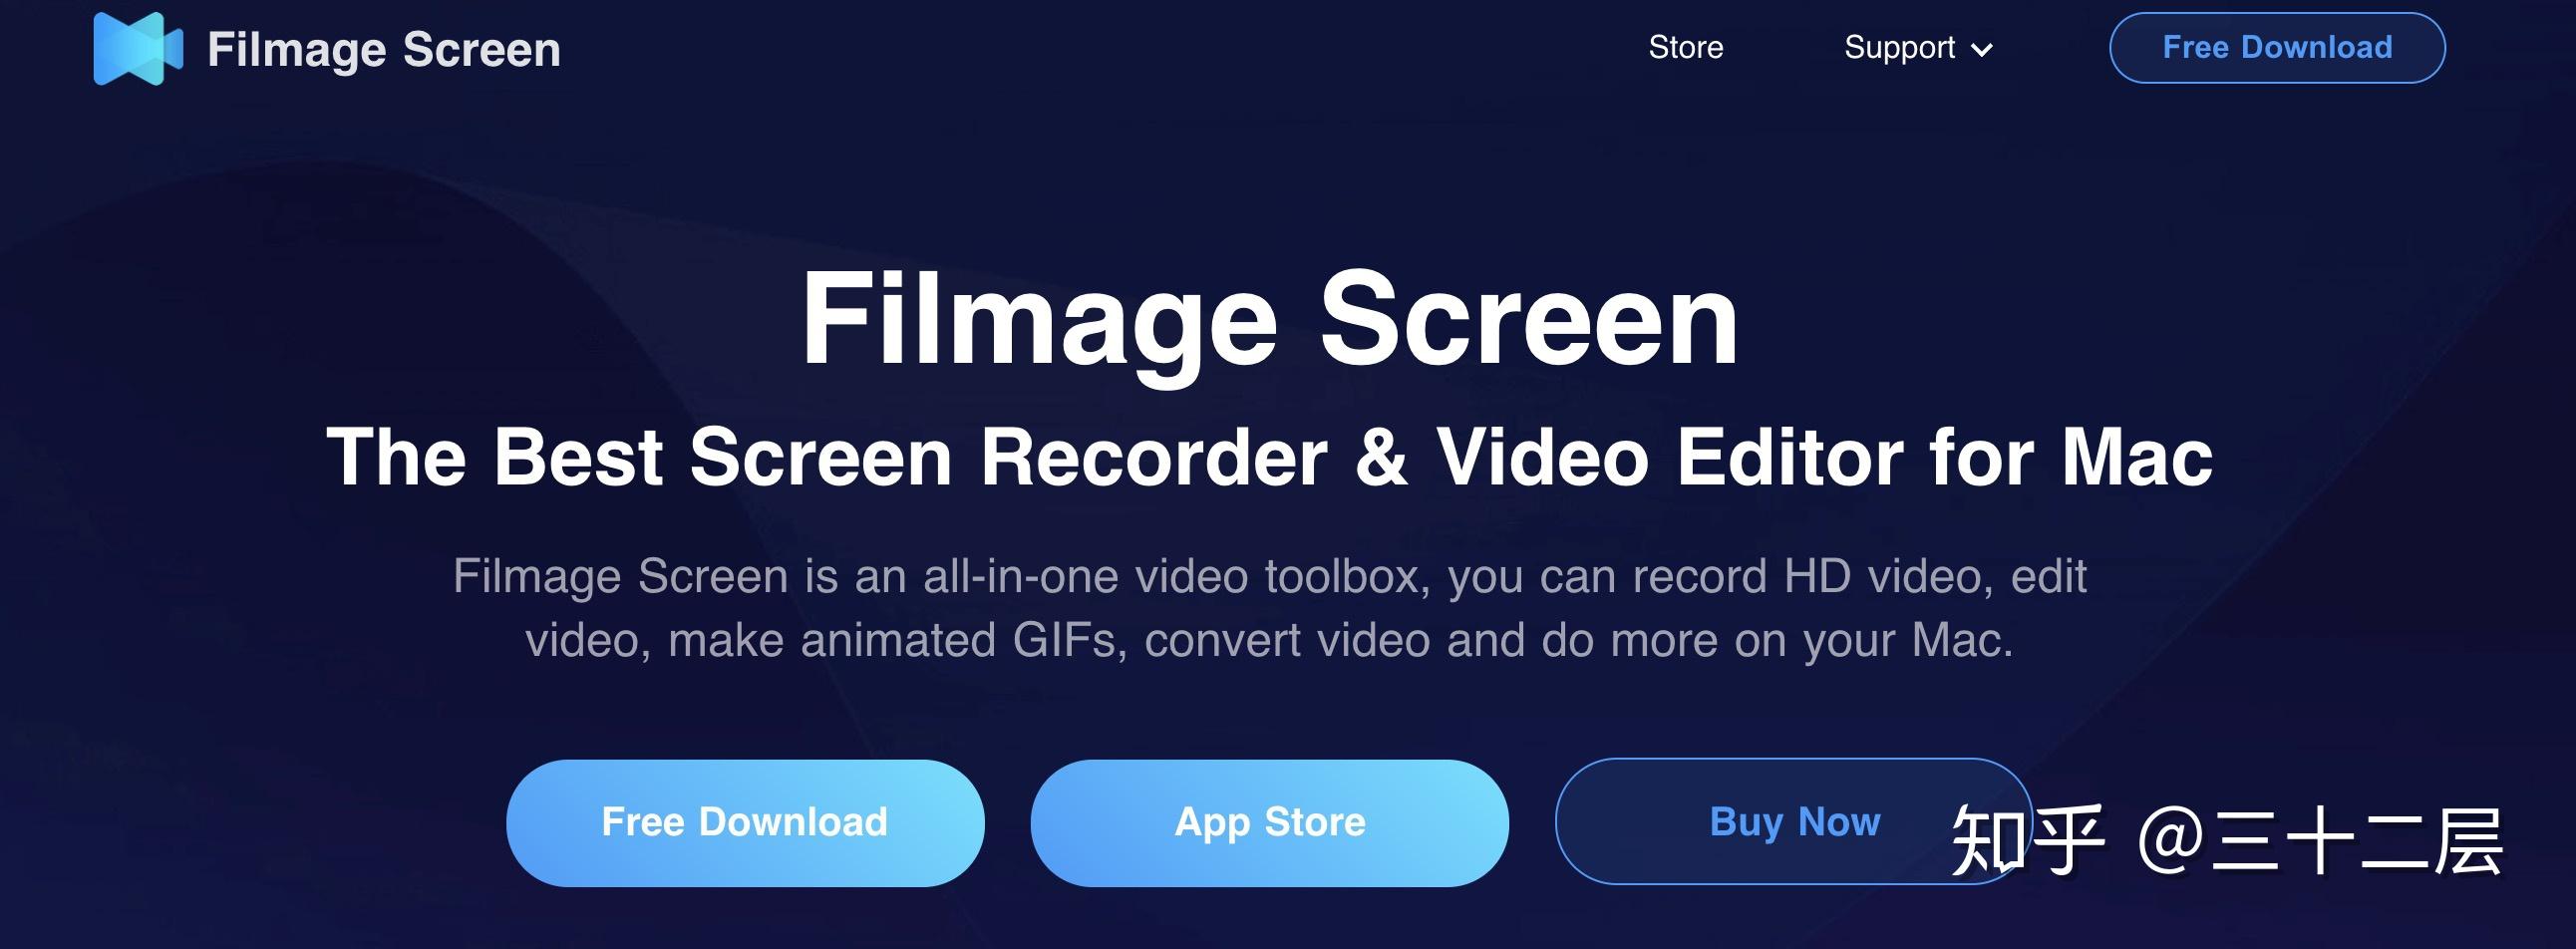 Filmage Screen download the new version for android